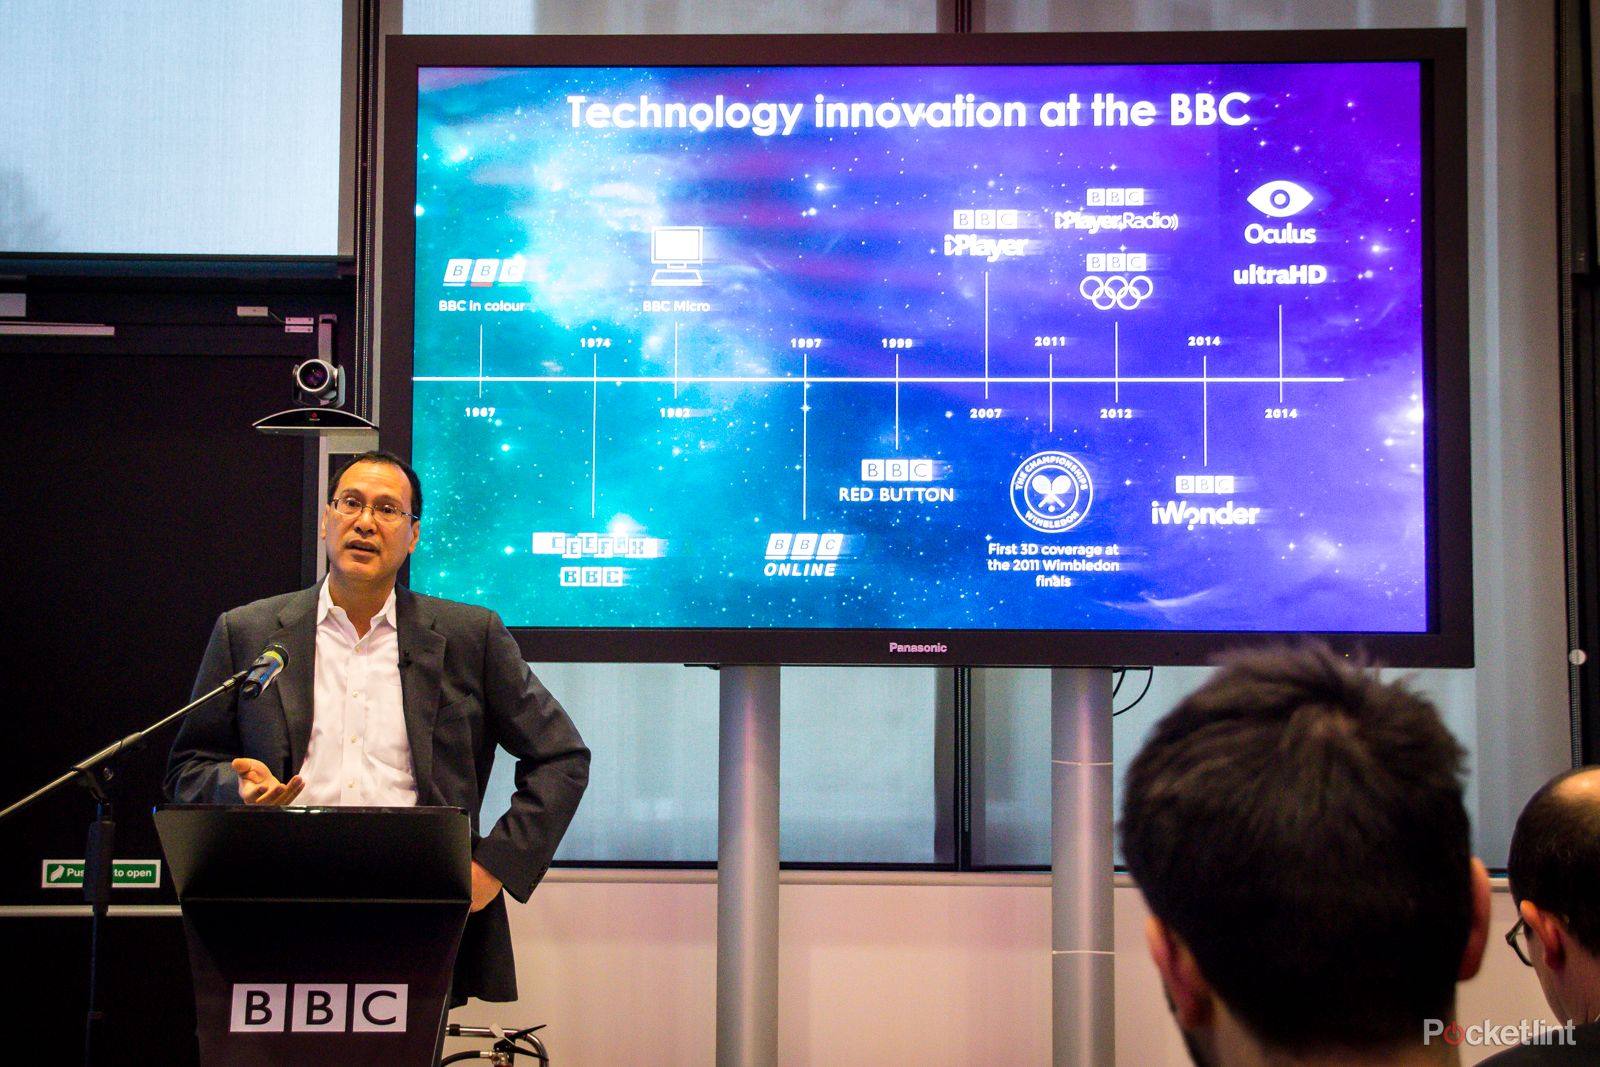 you can sample the bbc s new digital innovations for free through bbc taster image 2